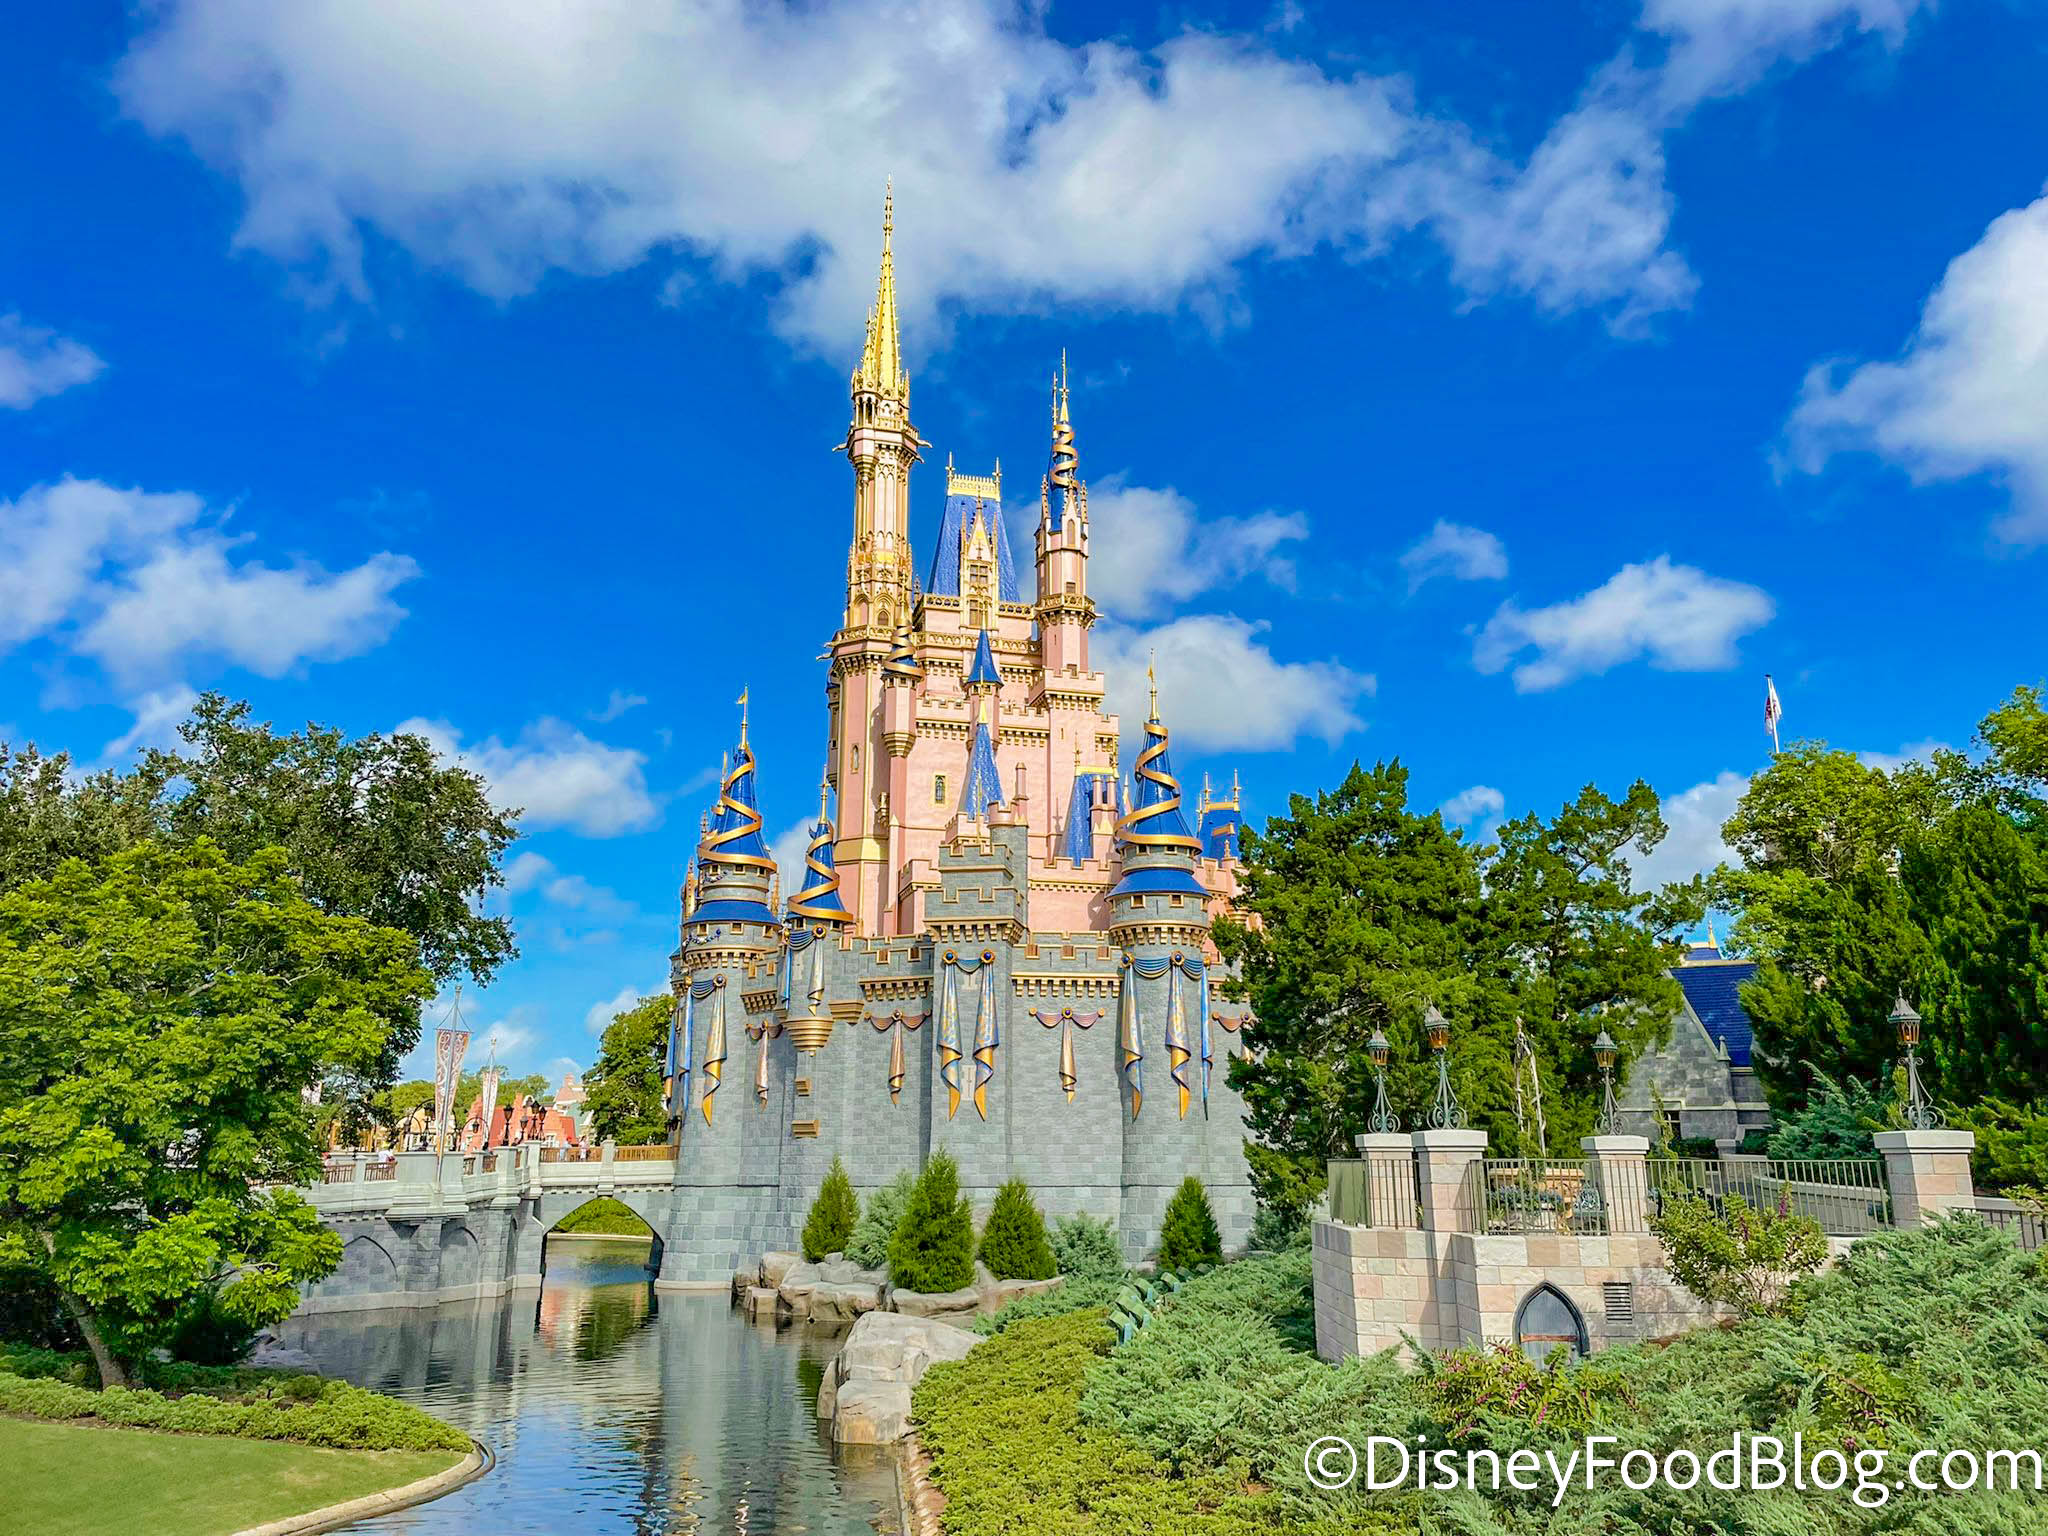 The Times To Visit Disney World With The Best (and Worst) Weather